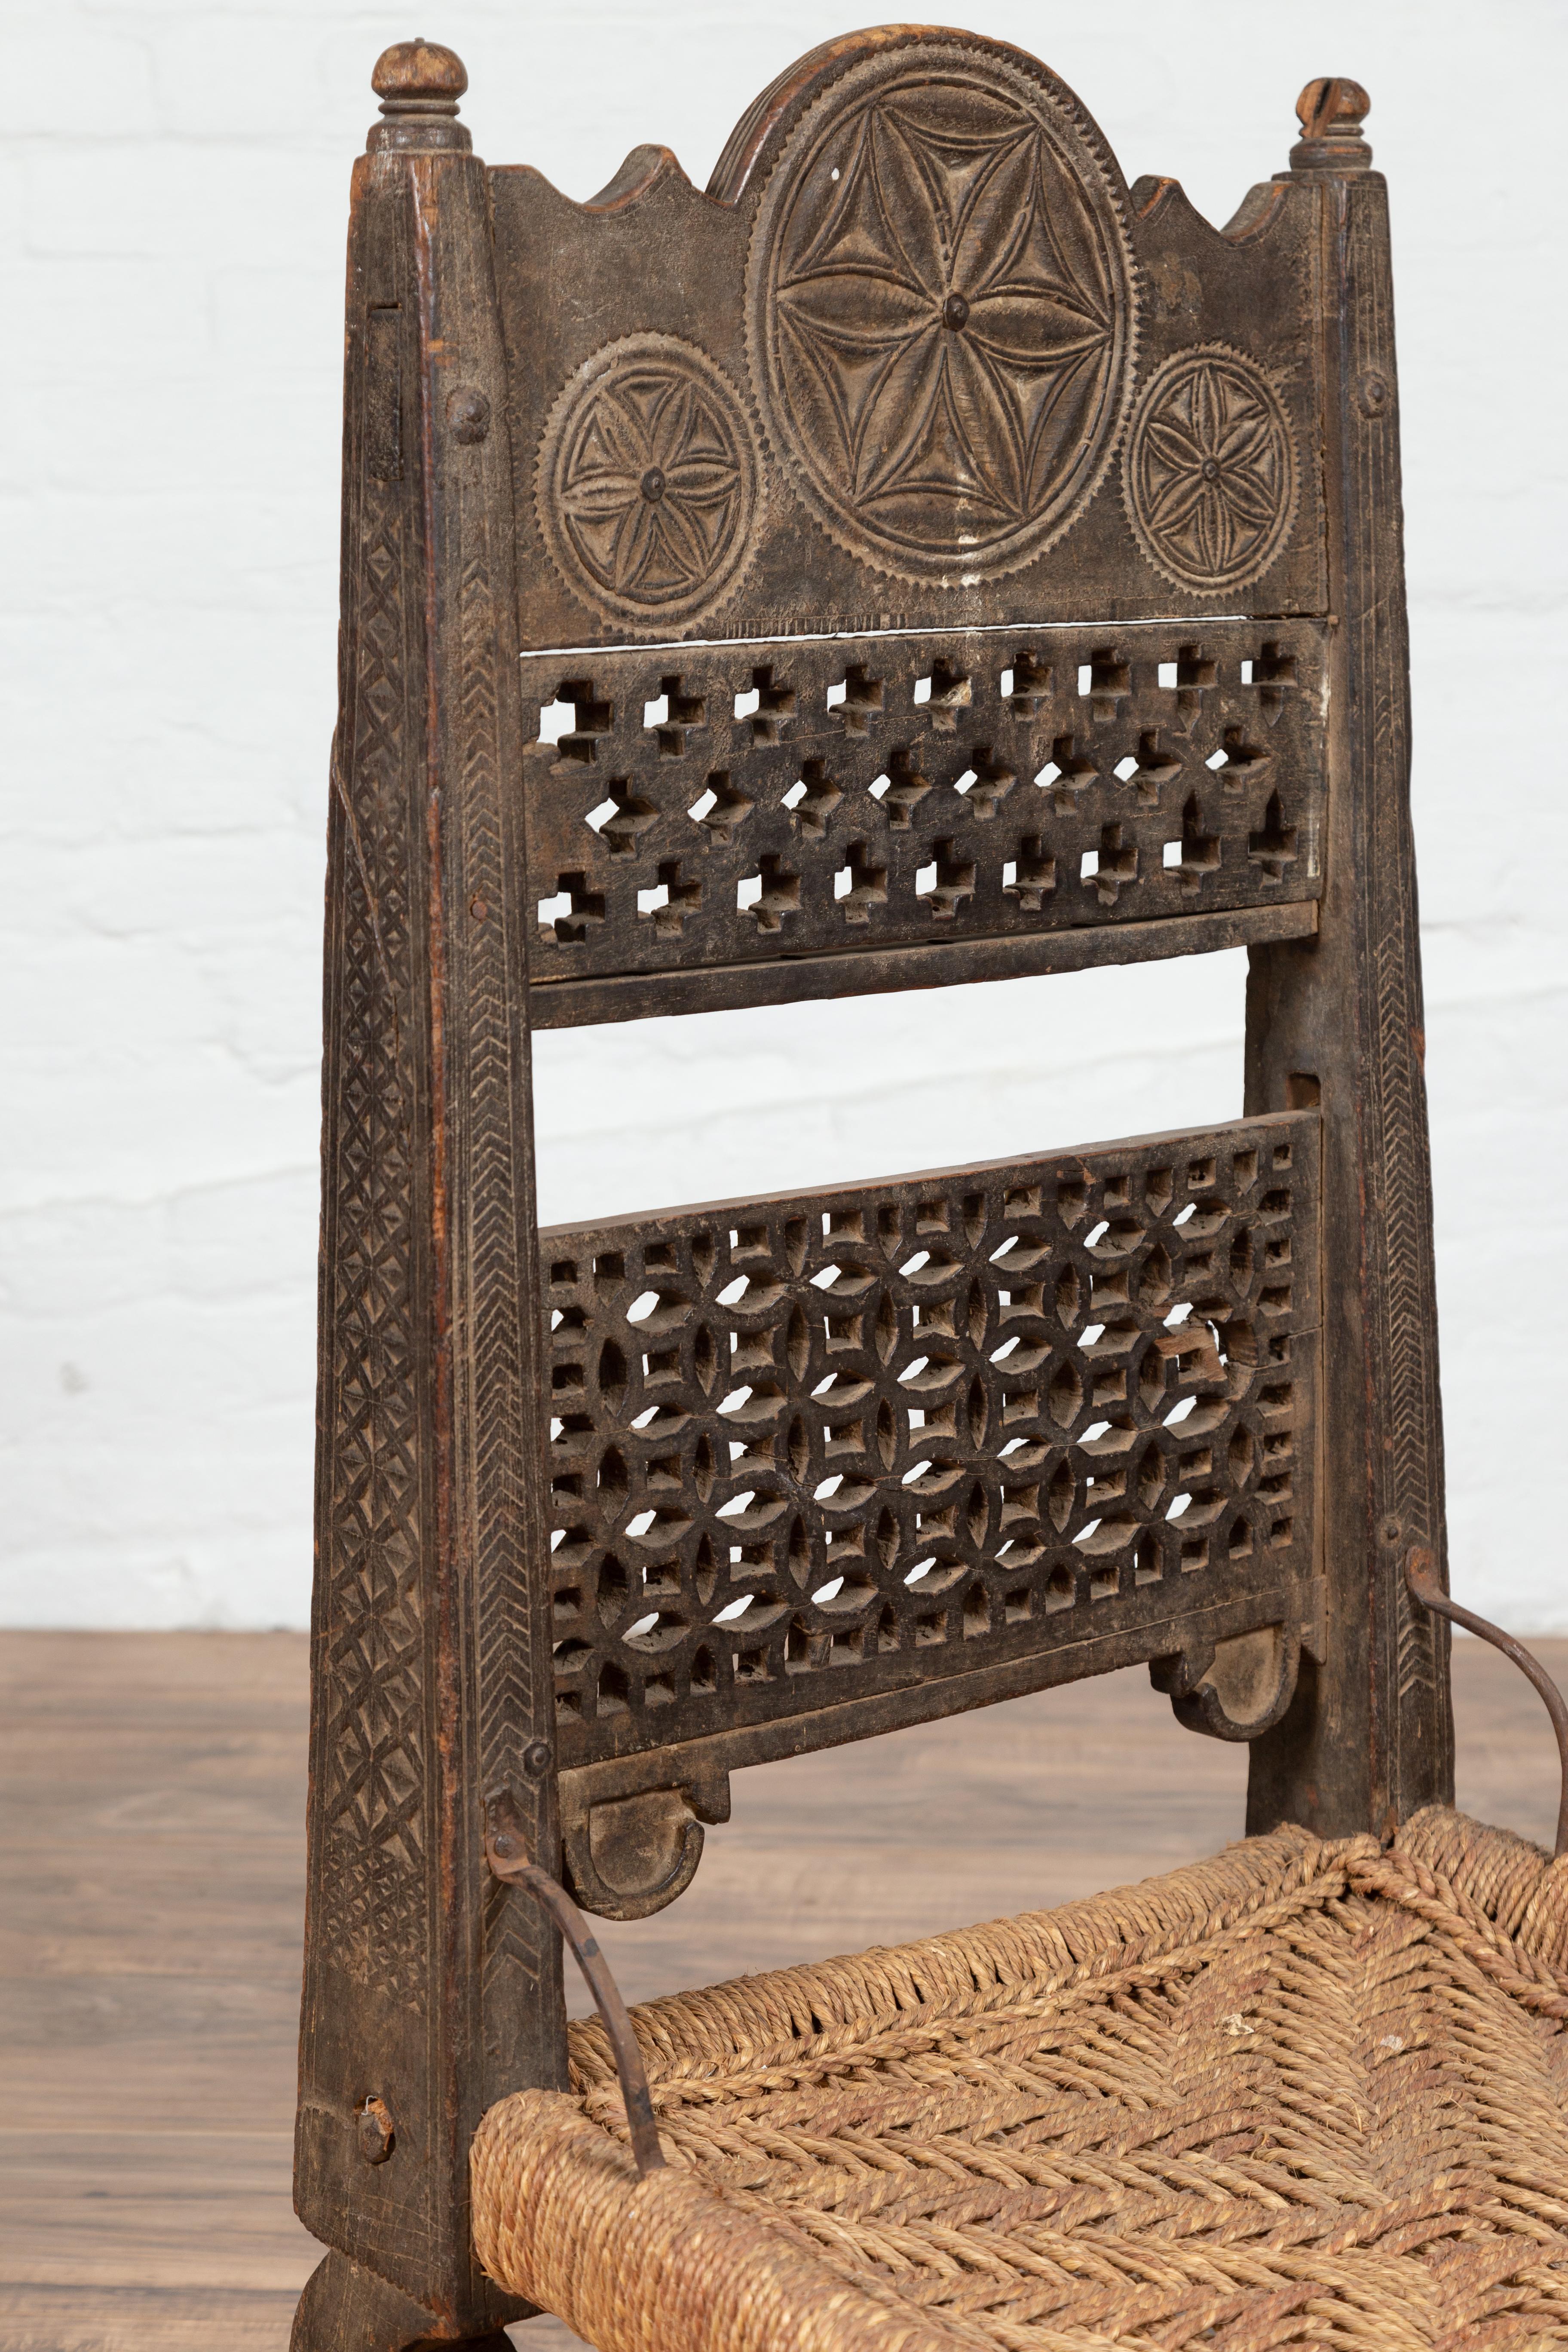 Hand-Carved Antique Indian Rustic Low Seat Wooden Chair with Fretwork Accents and Rosettes For Sale